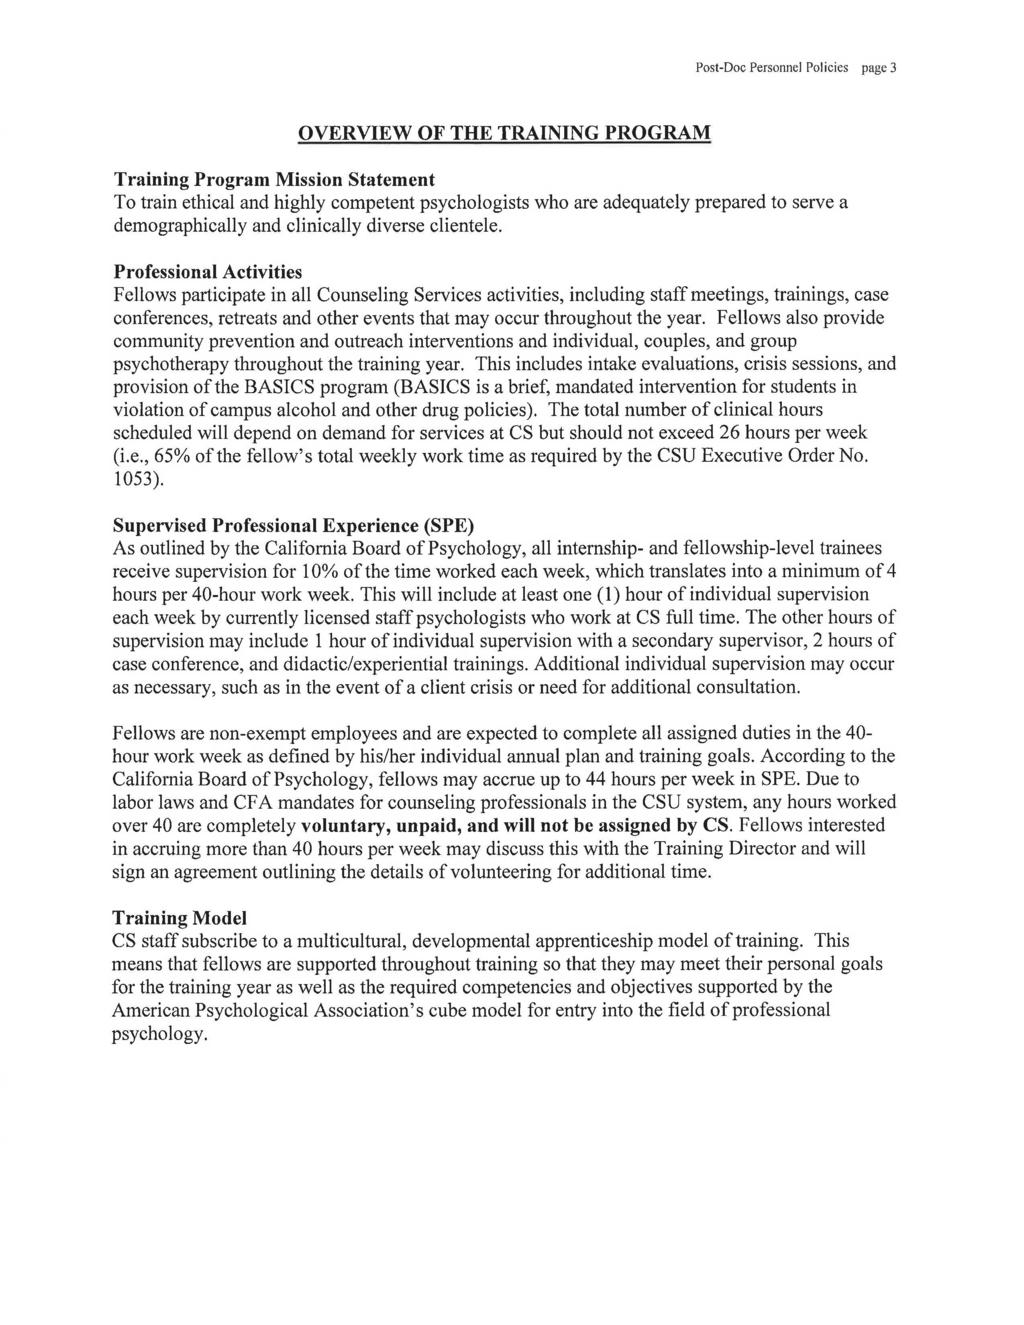 Post-Doc Personnel Policies page 3 OVERVIEW OF THE TRAINING PROGRAM Training Program Mission Statement To train ethical and highly competent psychologists who are adequately prepared to serve a